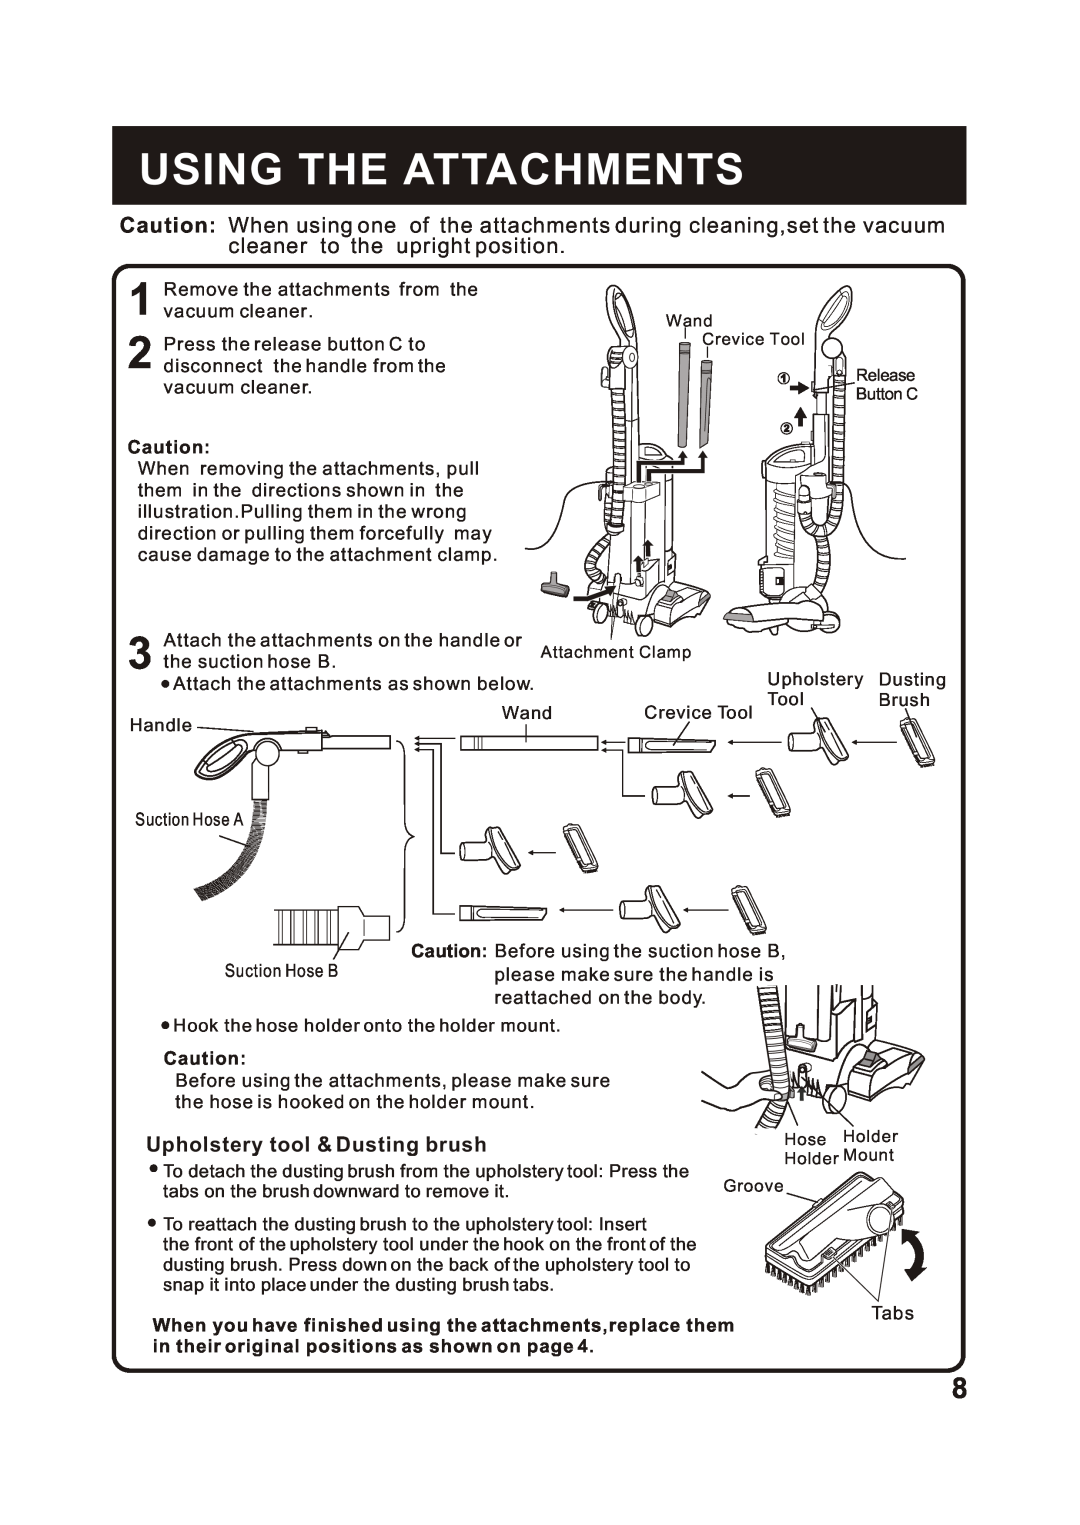 Fantom Vacuum FM741 instruction manual Using The Attachments, Upholstery tool & Dusting brush 